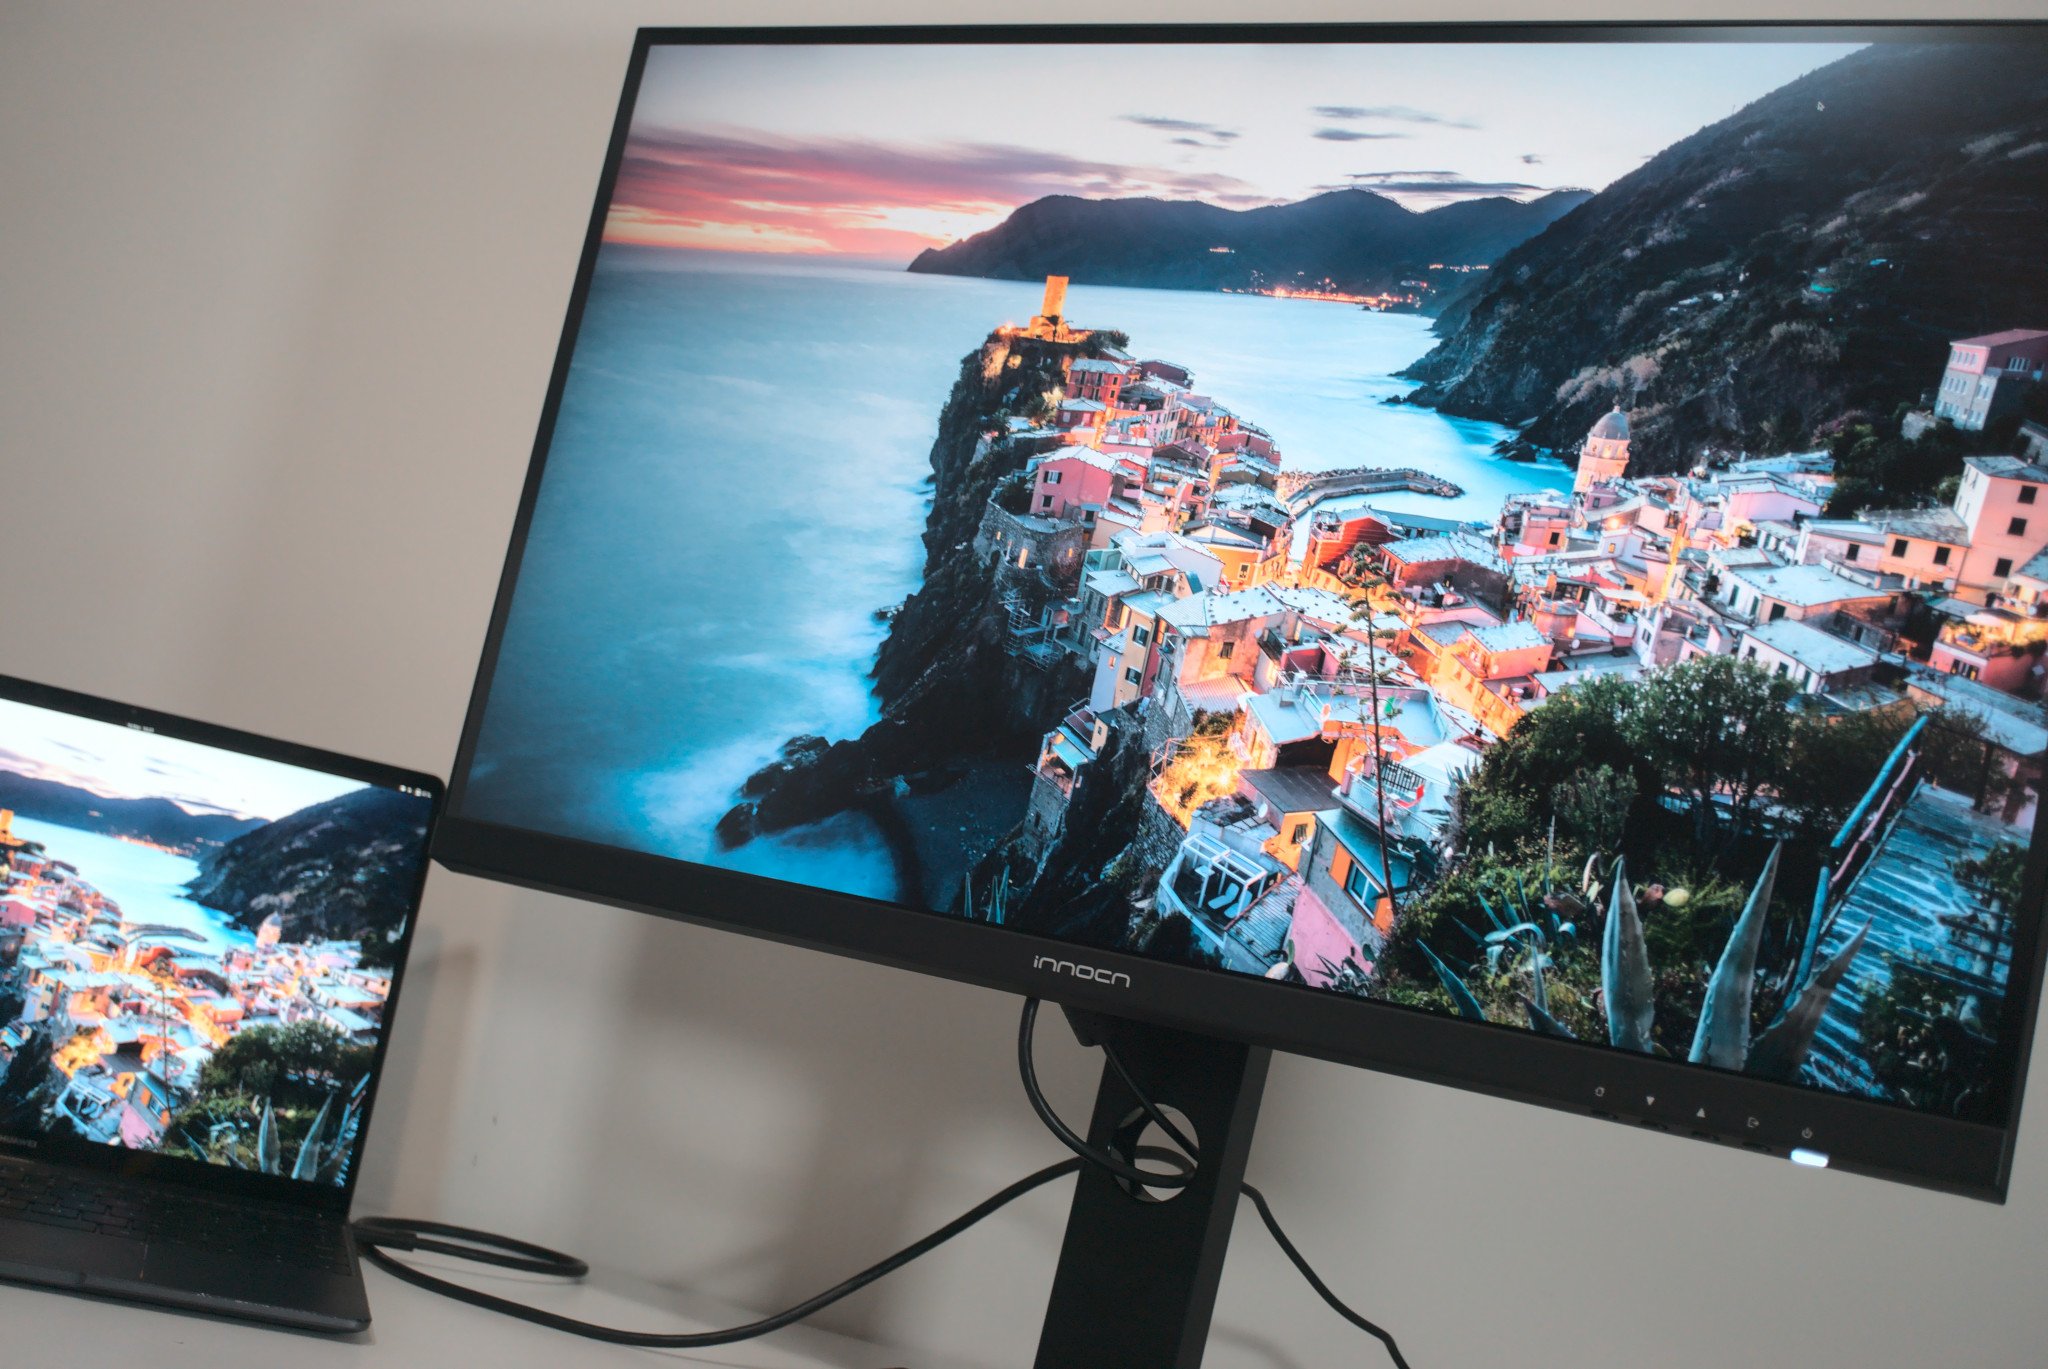 Innocn 27 4K Monitor Review (Pros, Cons, Features & Value)